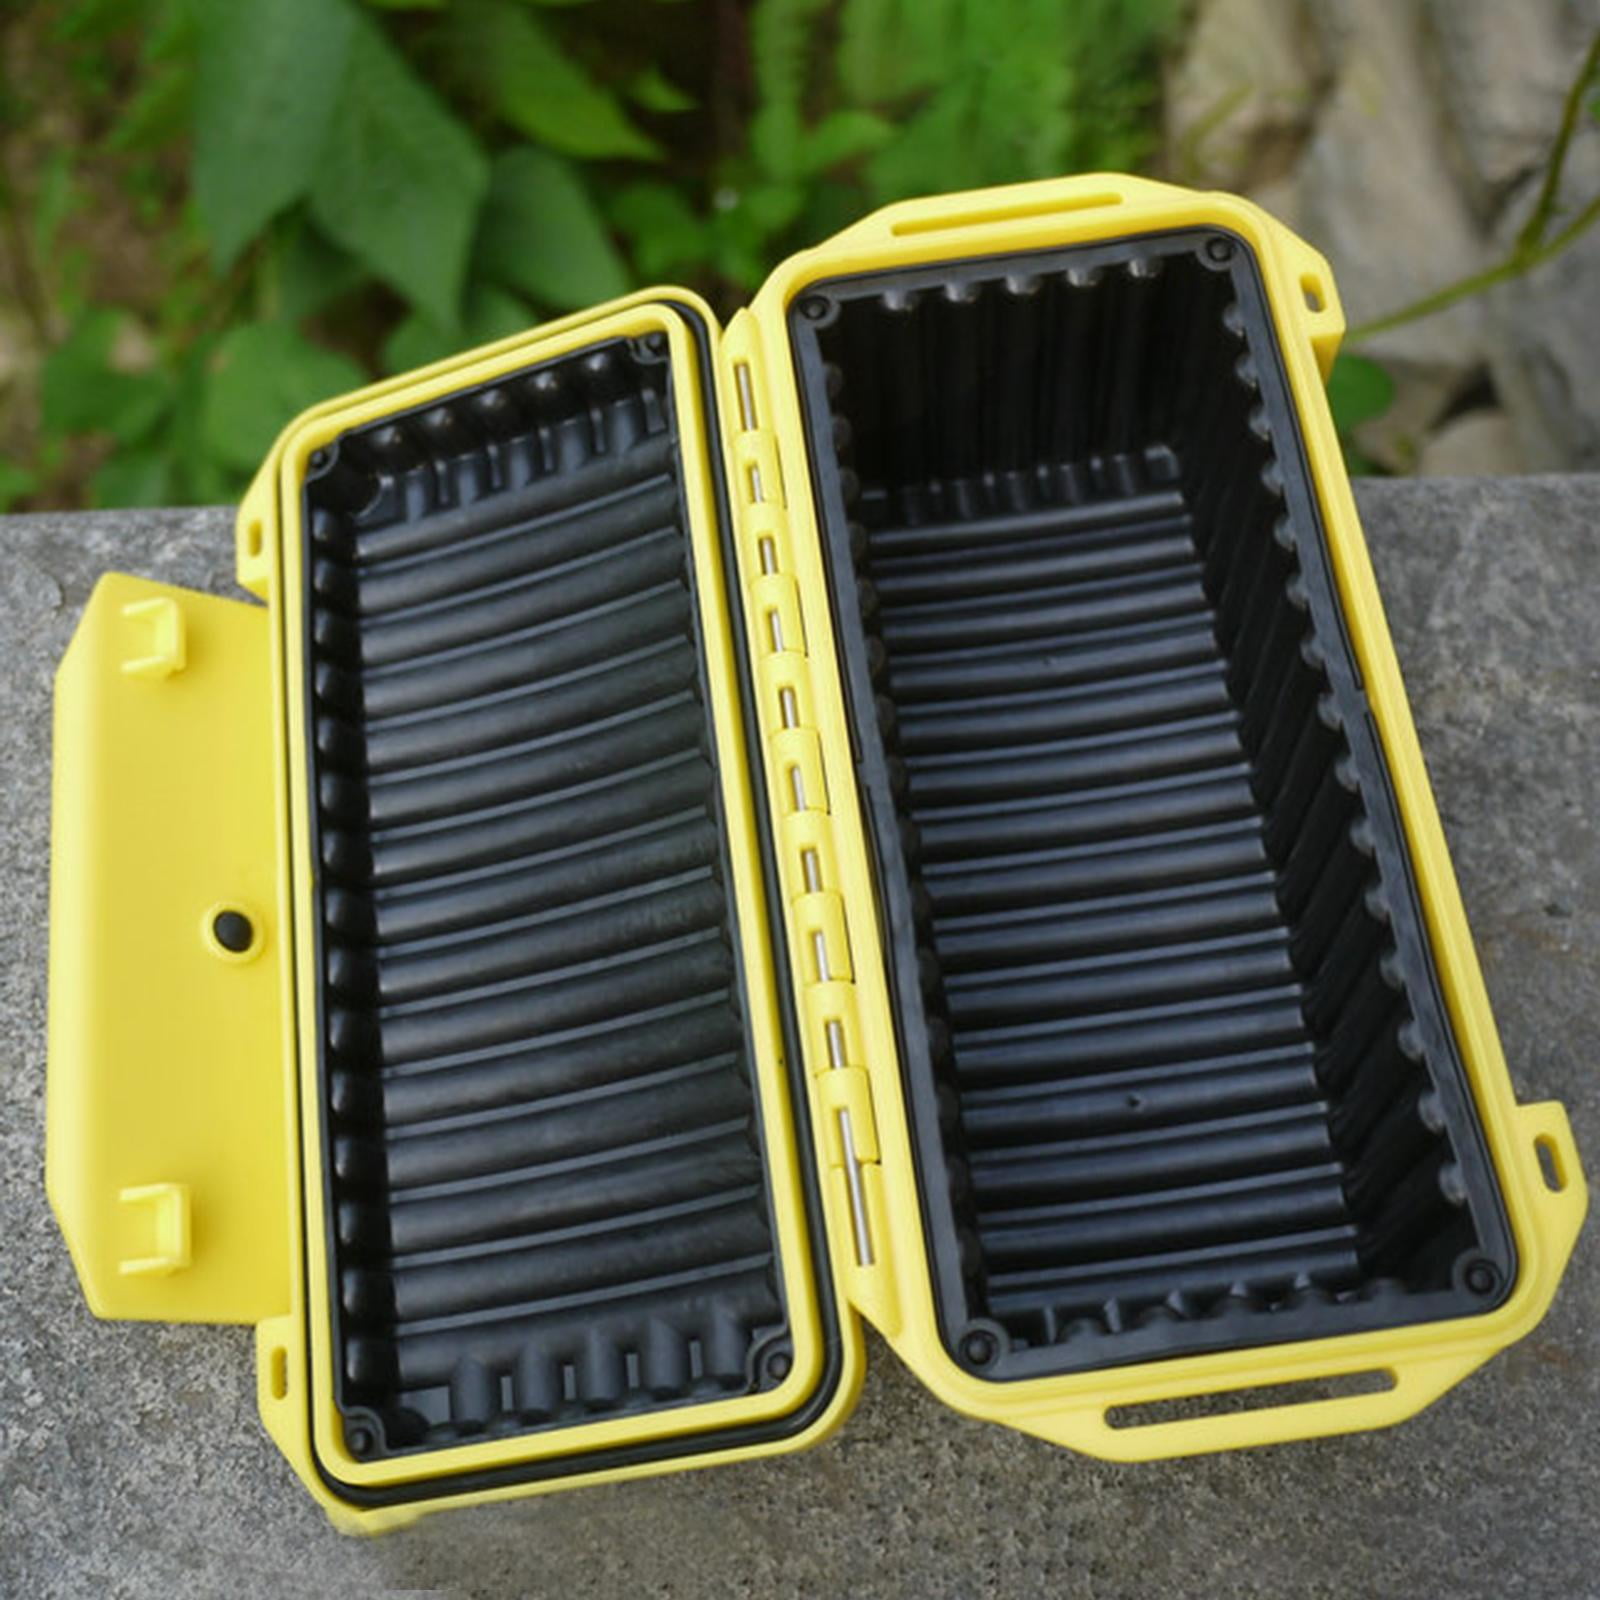 Outdoor Waterproof Shockproof Box, Tool Box Enclosure Airtight Container  Storage Travel Sealed Containers - Yellow 200x98x82mm 